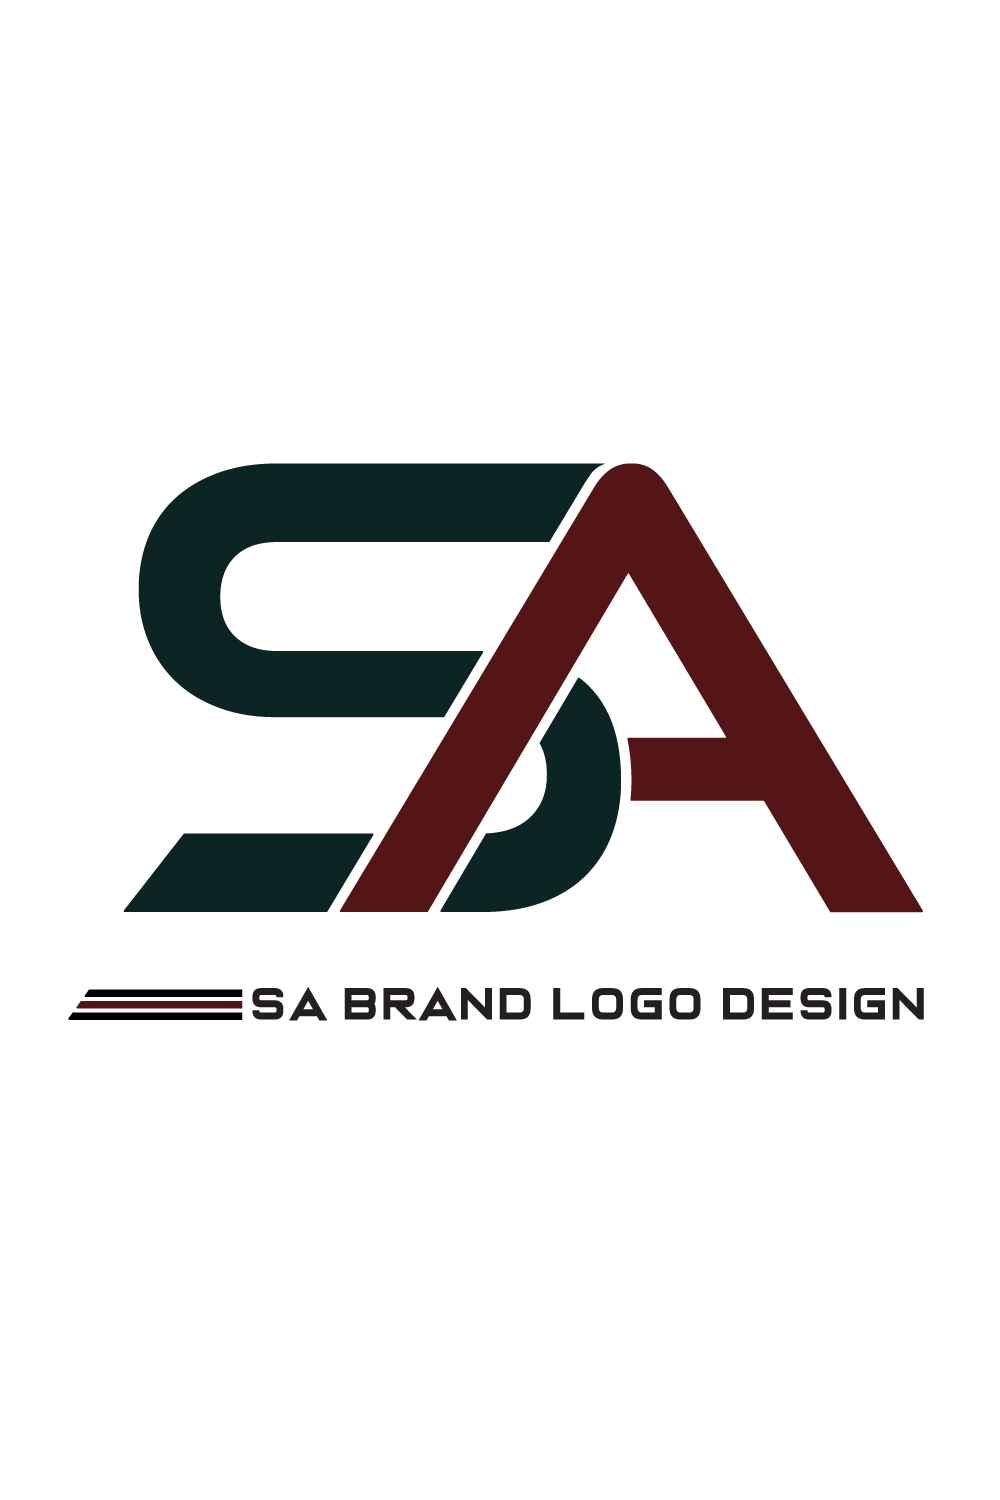 Initials SA letters logo design vector images SA logo design template icon AS logo monogram best company identity pinterest preview image.